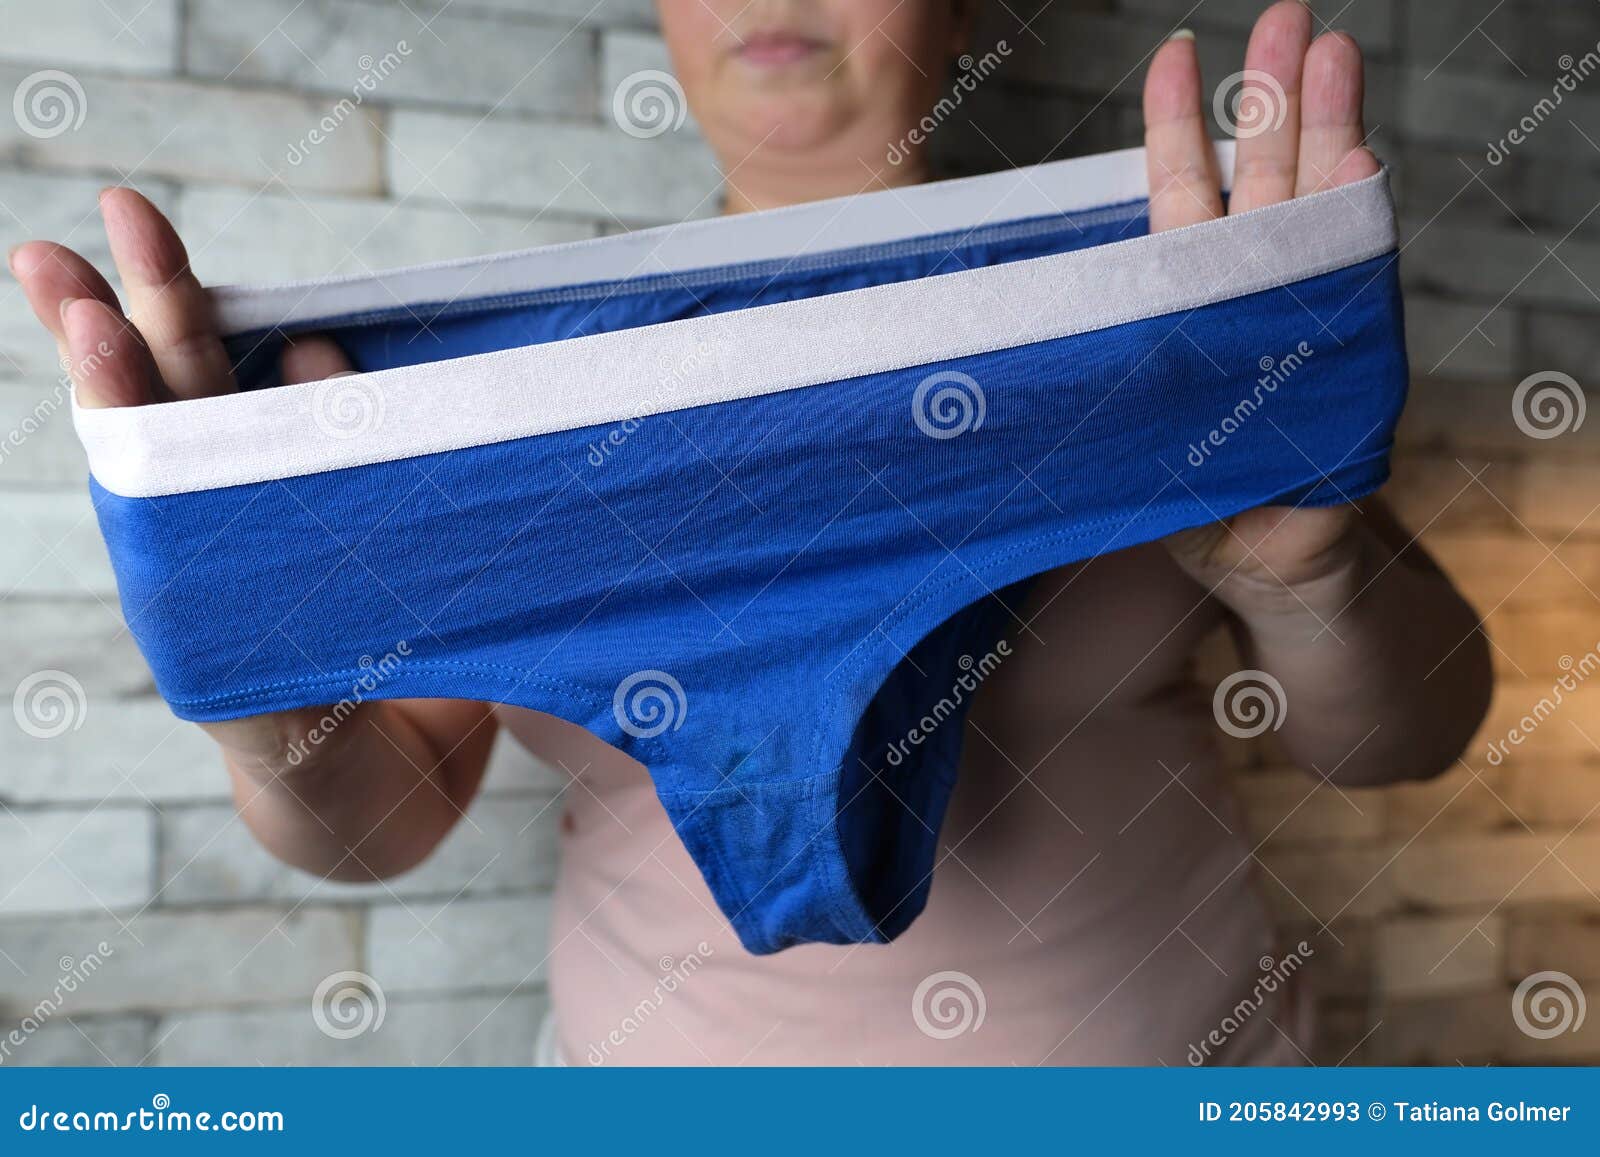 Woman Holding Blue Female Panties in Her Hands, Knitted Underwear ...